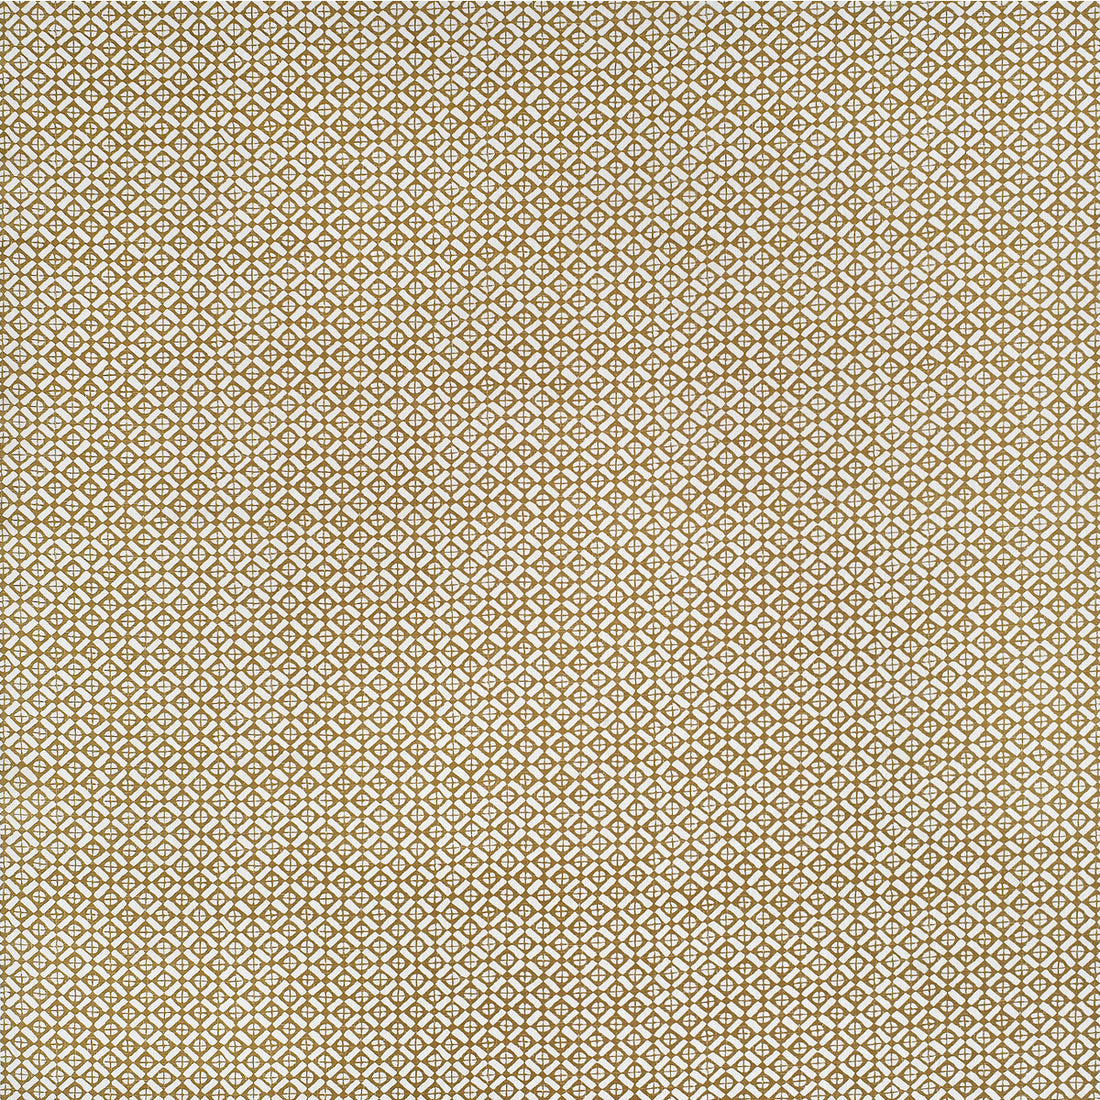 Audley Outdoor fabric in ochre color - pattern AM100386.4.0 - by Kravet Couture in the Andrew Martin Sophie Patterson Outdoor collection